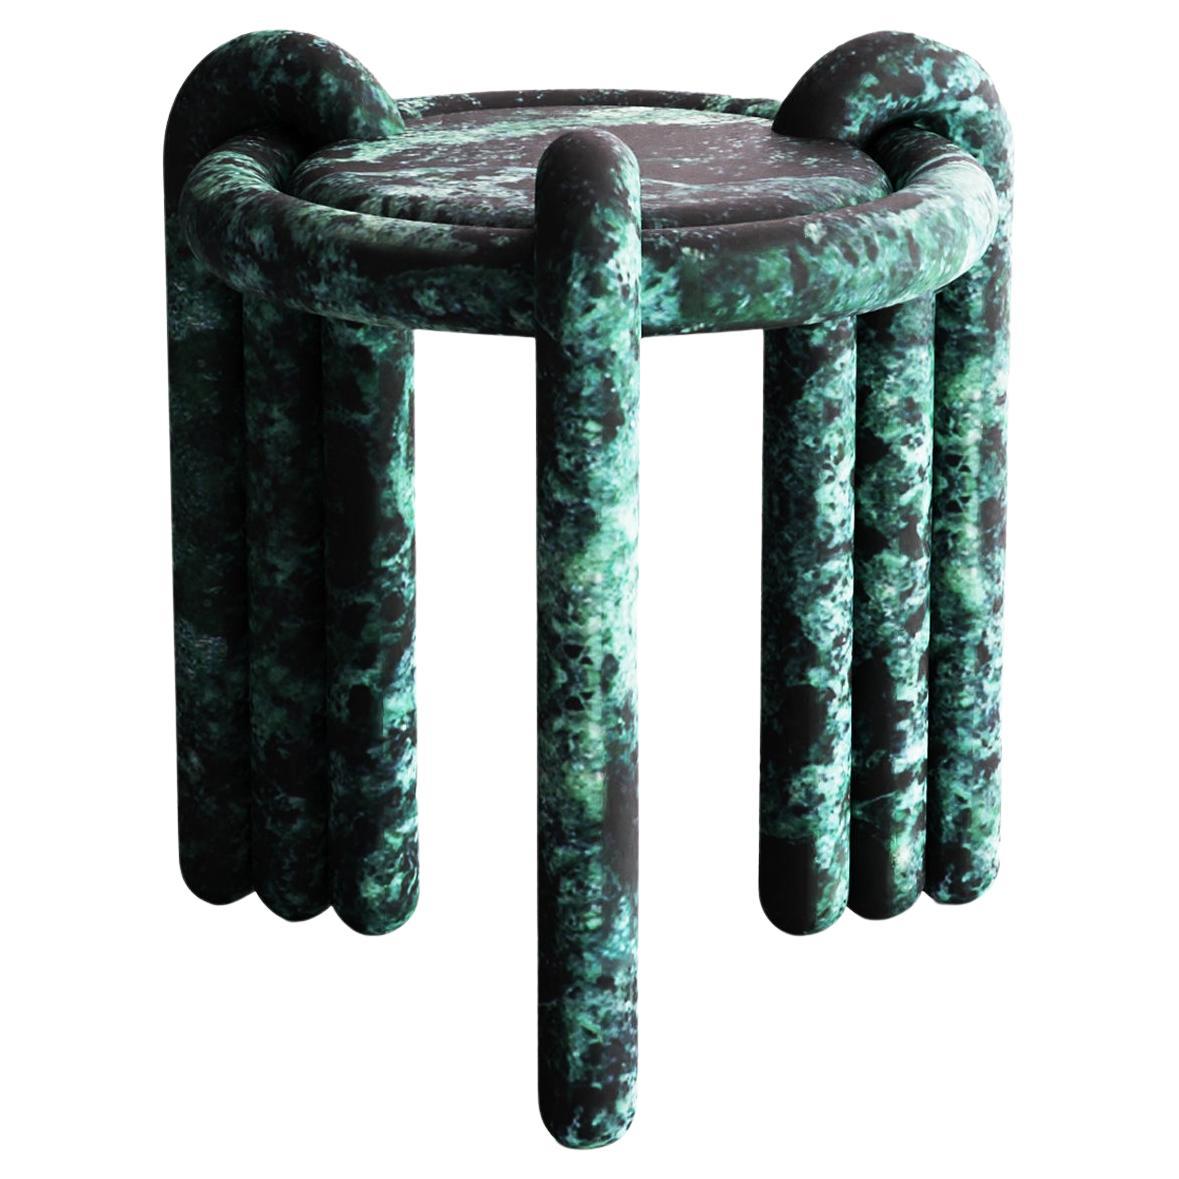 Sculptural Kipferl Occasional Table by Lara Bohinc in Verde Alpi Marble